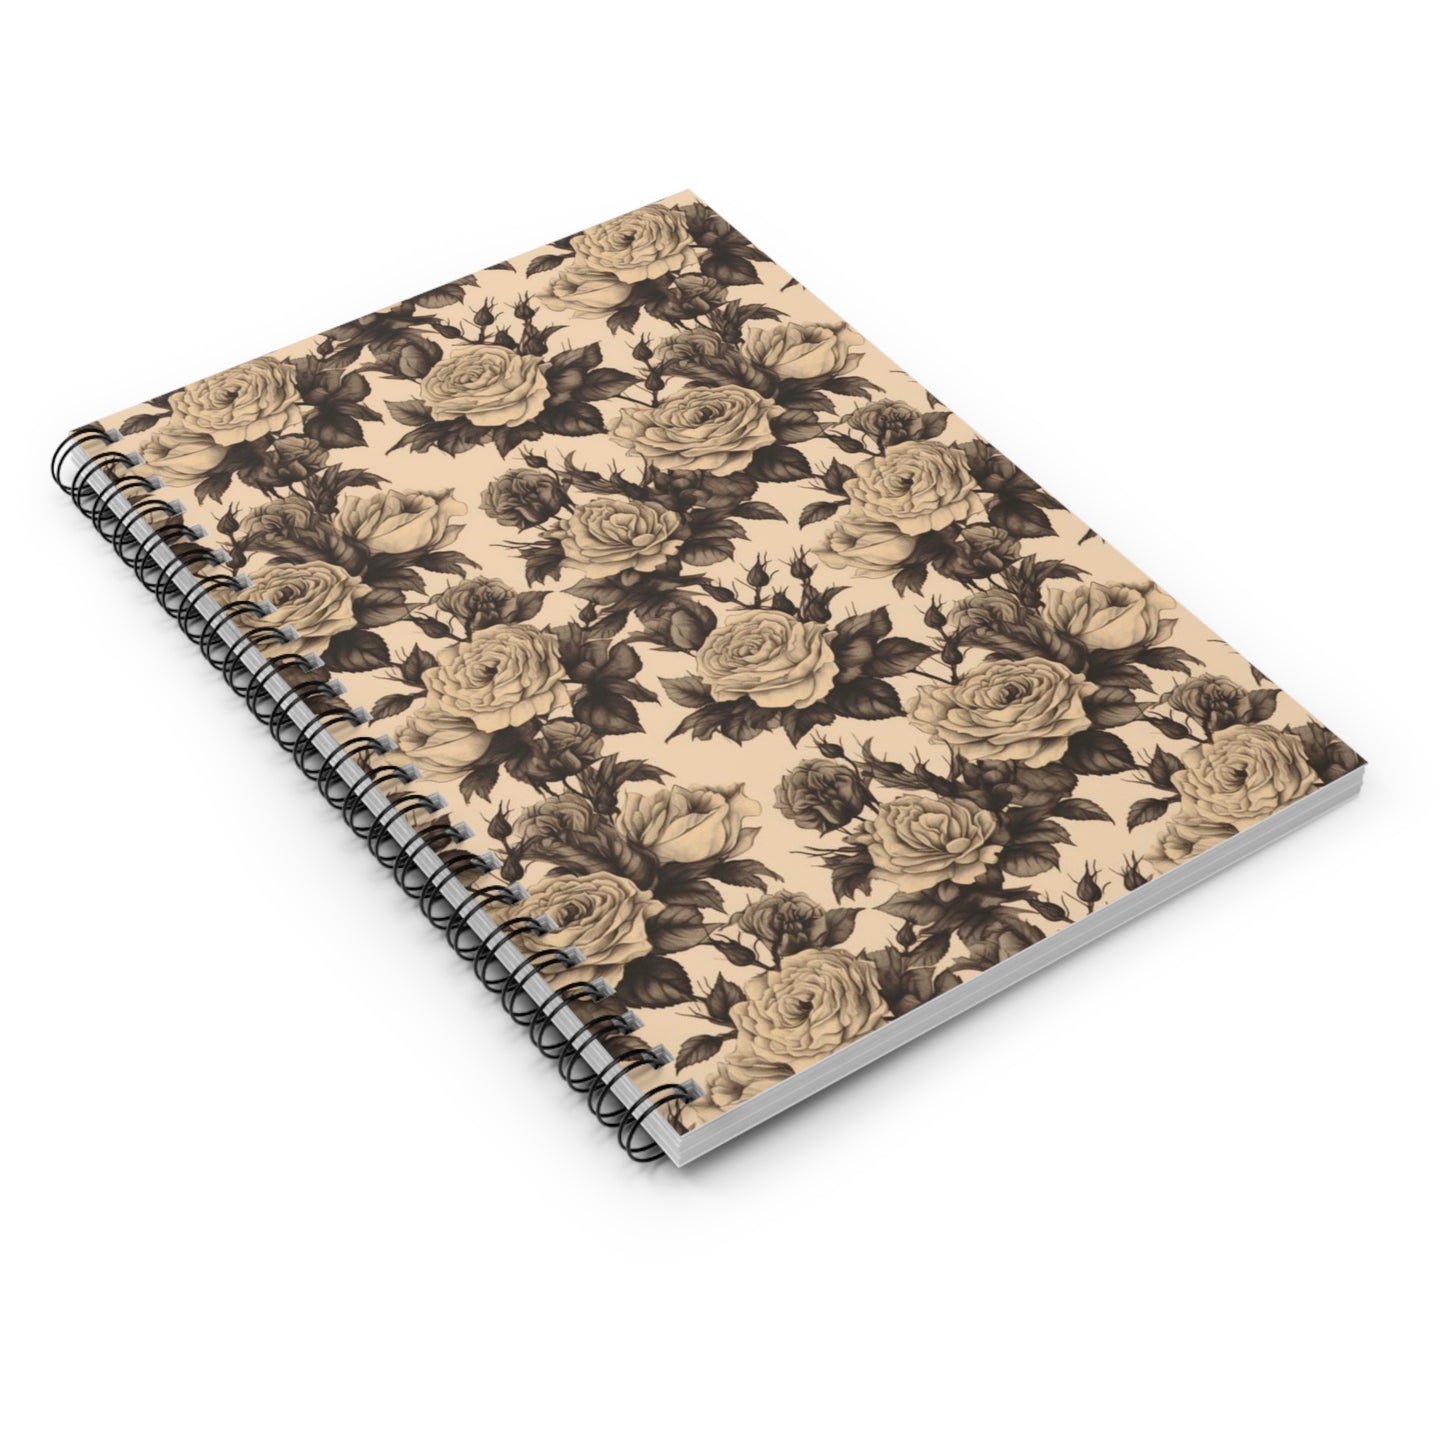 Black and Ivory Roses | Ruled Line Spiral Notebook